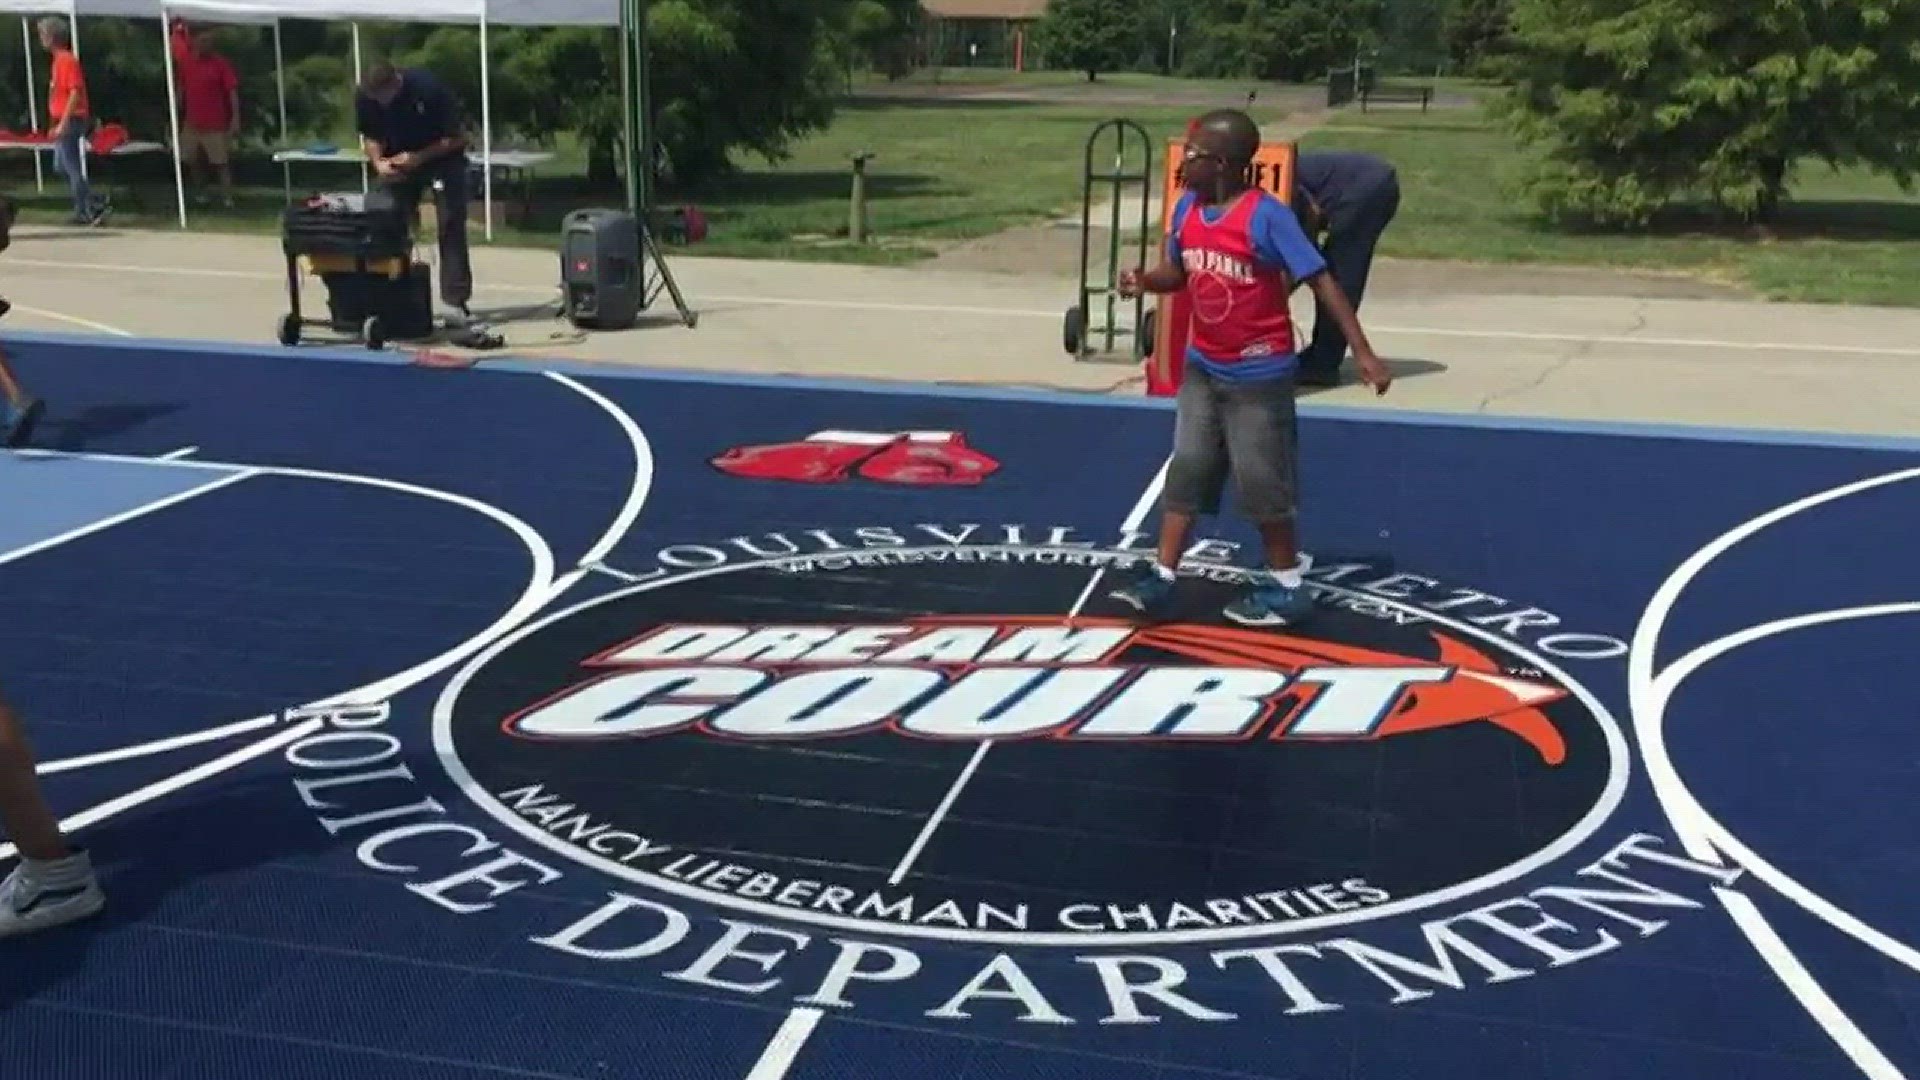 The dream court officially opened at Russell Lee Park Tuesday afternoon. Nancy Lieberman Charities teamed up with the Louisville Metro Police to make it happen.